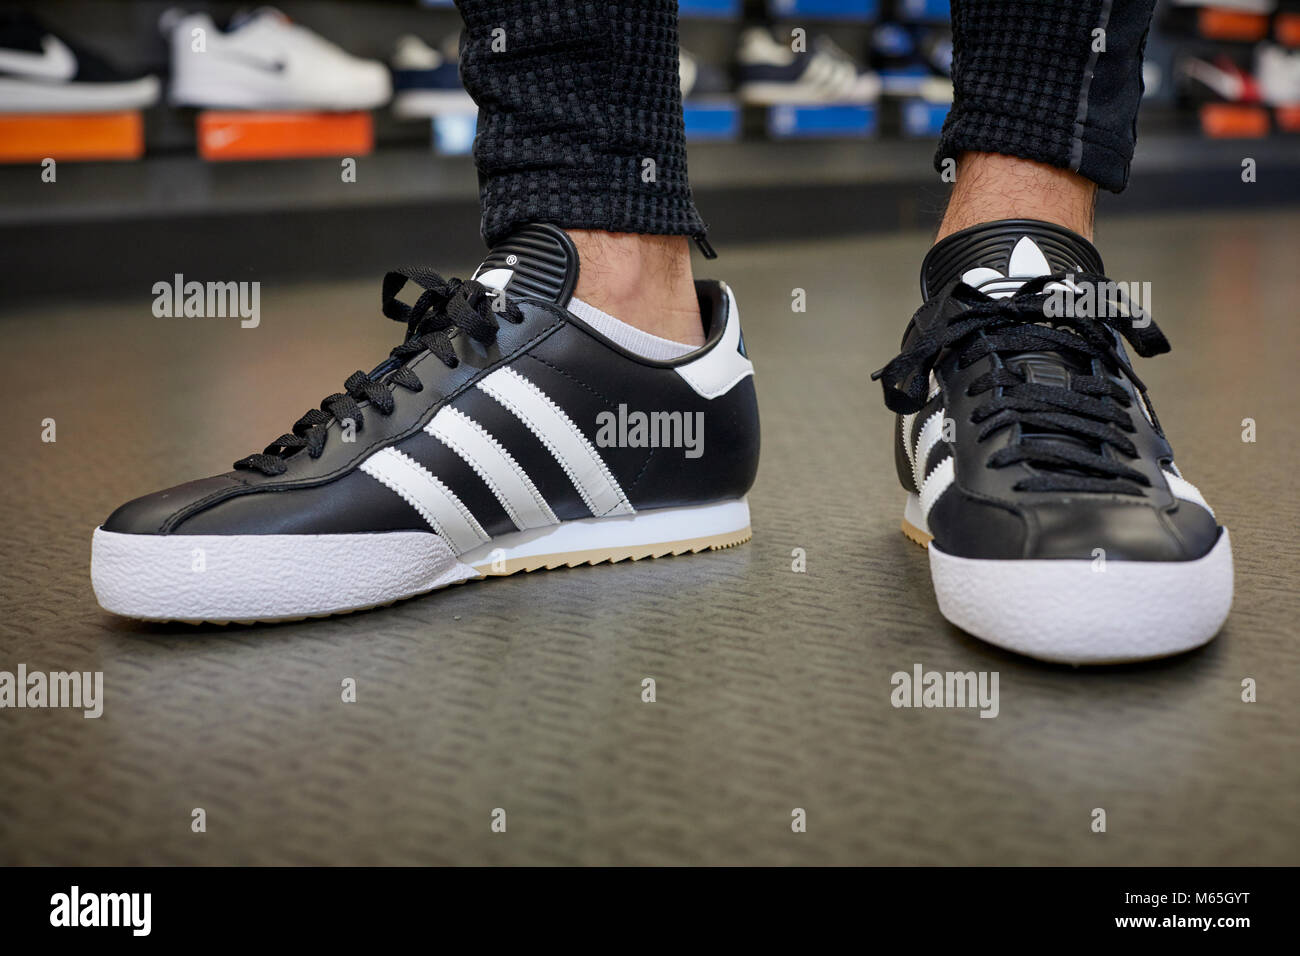 Adidas Outlet Store High Resolution Stock Photography and Images - Alamy